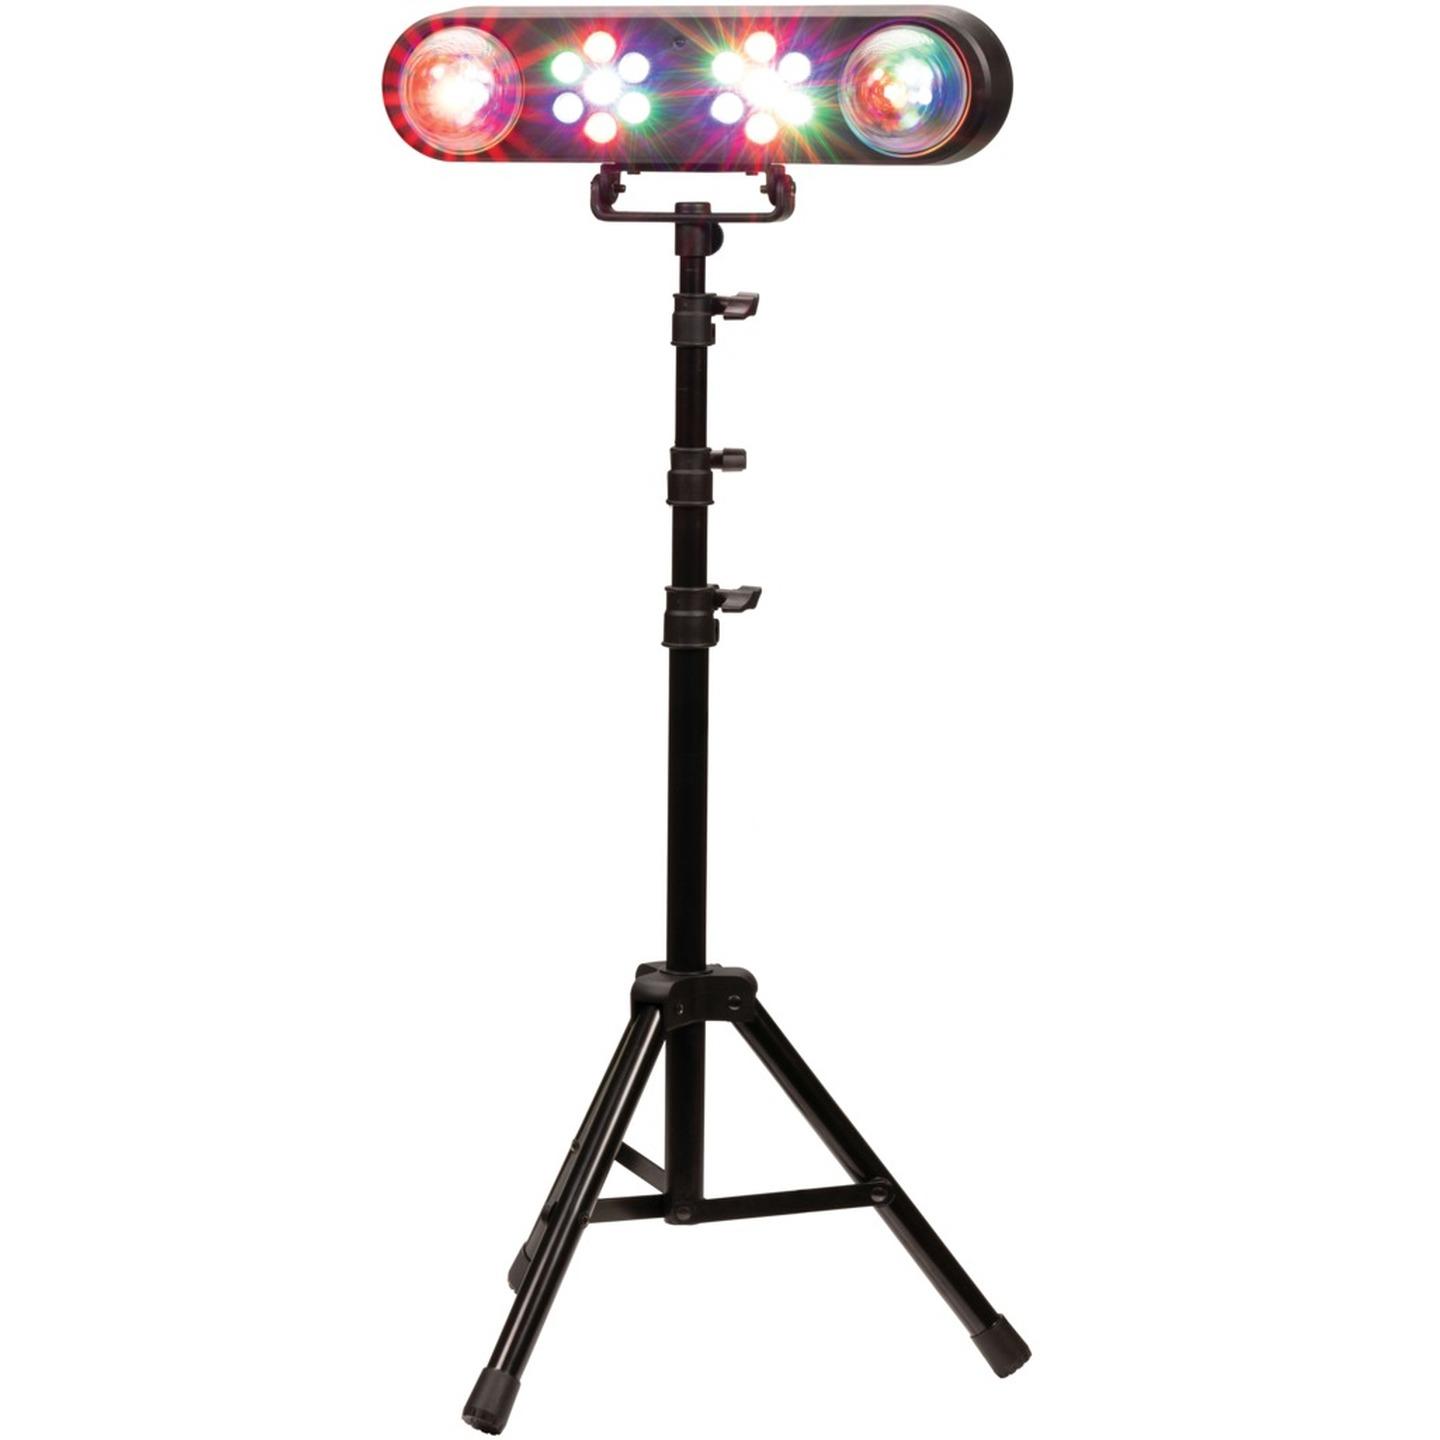 LED Party Lighting Kit with Stand